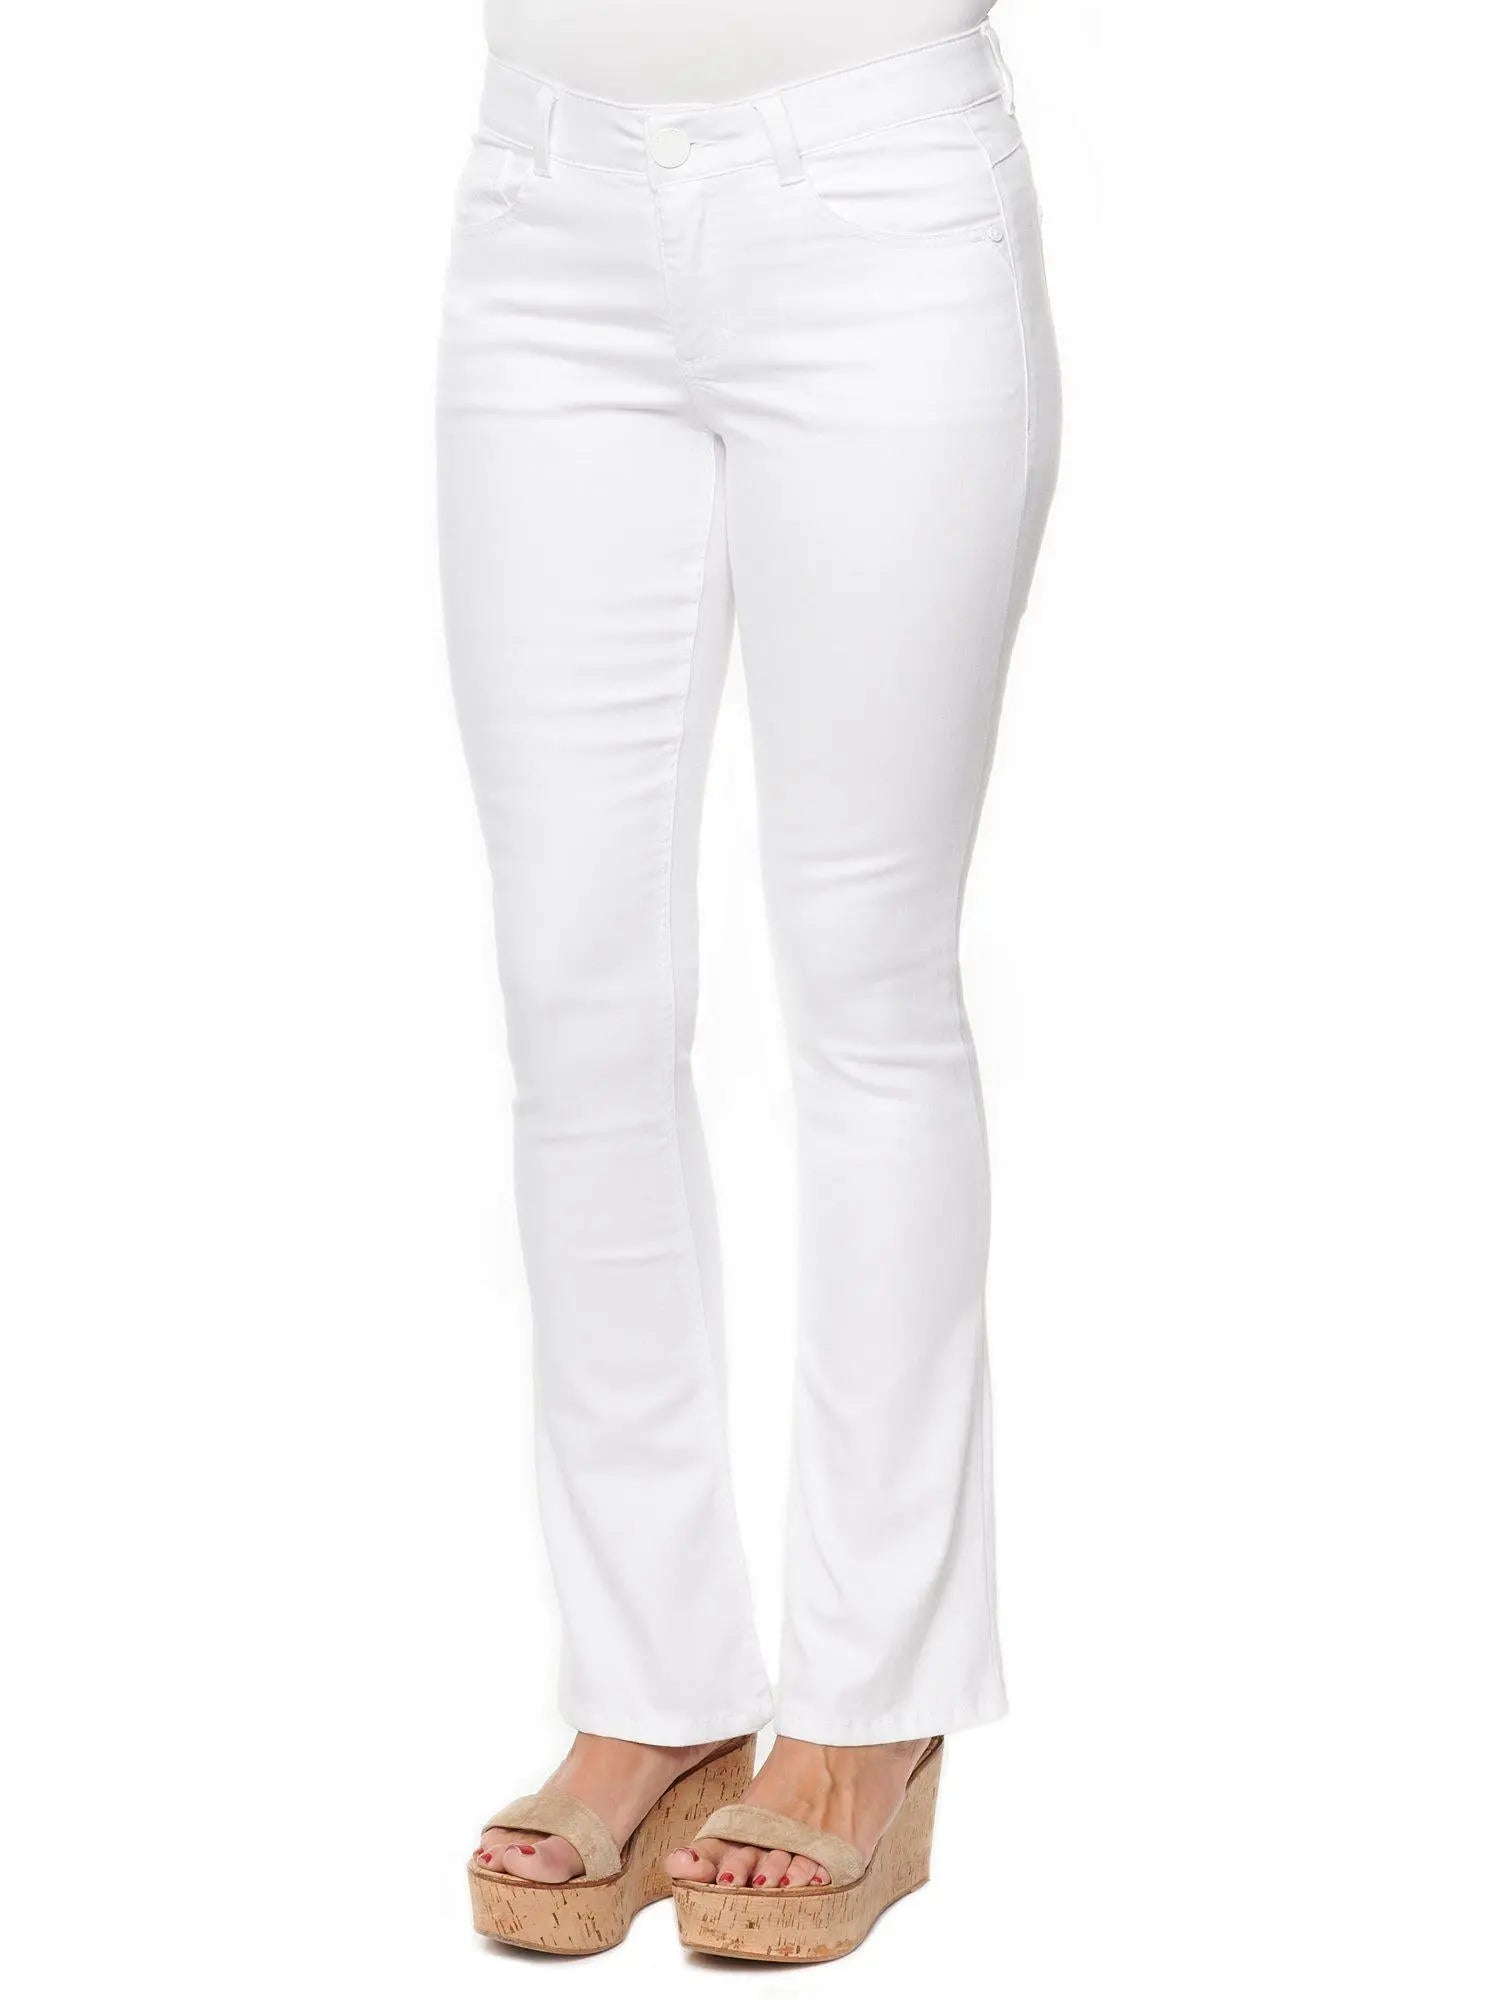 https://jolievaughan.com/cdn/shop/products/Democracy-Ab-Solution-Itty-Bitty-Booty-Jeans-Jolie-Vaughan---Online-Clothing-Boutique-near-Baton-Rouge_-LA-1641262011_8ccd4a96-06a8-4003-8957-e75334cdc982.jpg?v=1645816008&width=2400